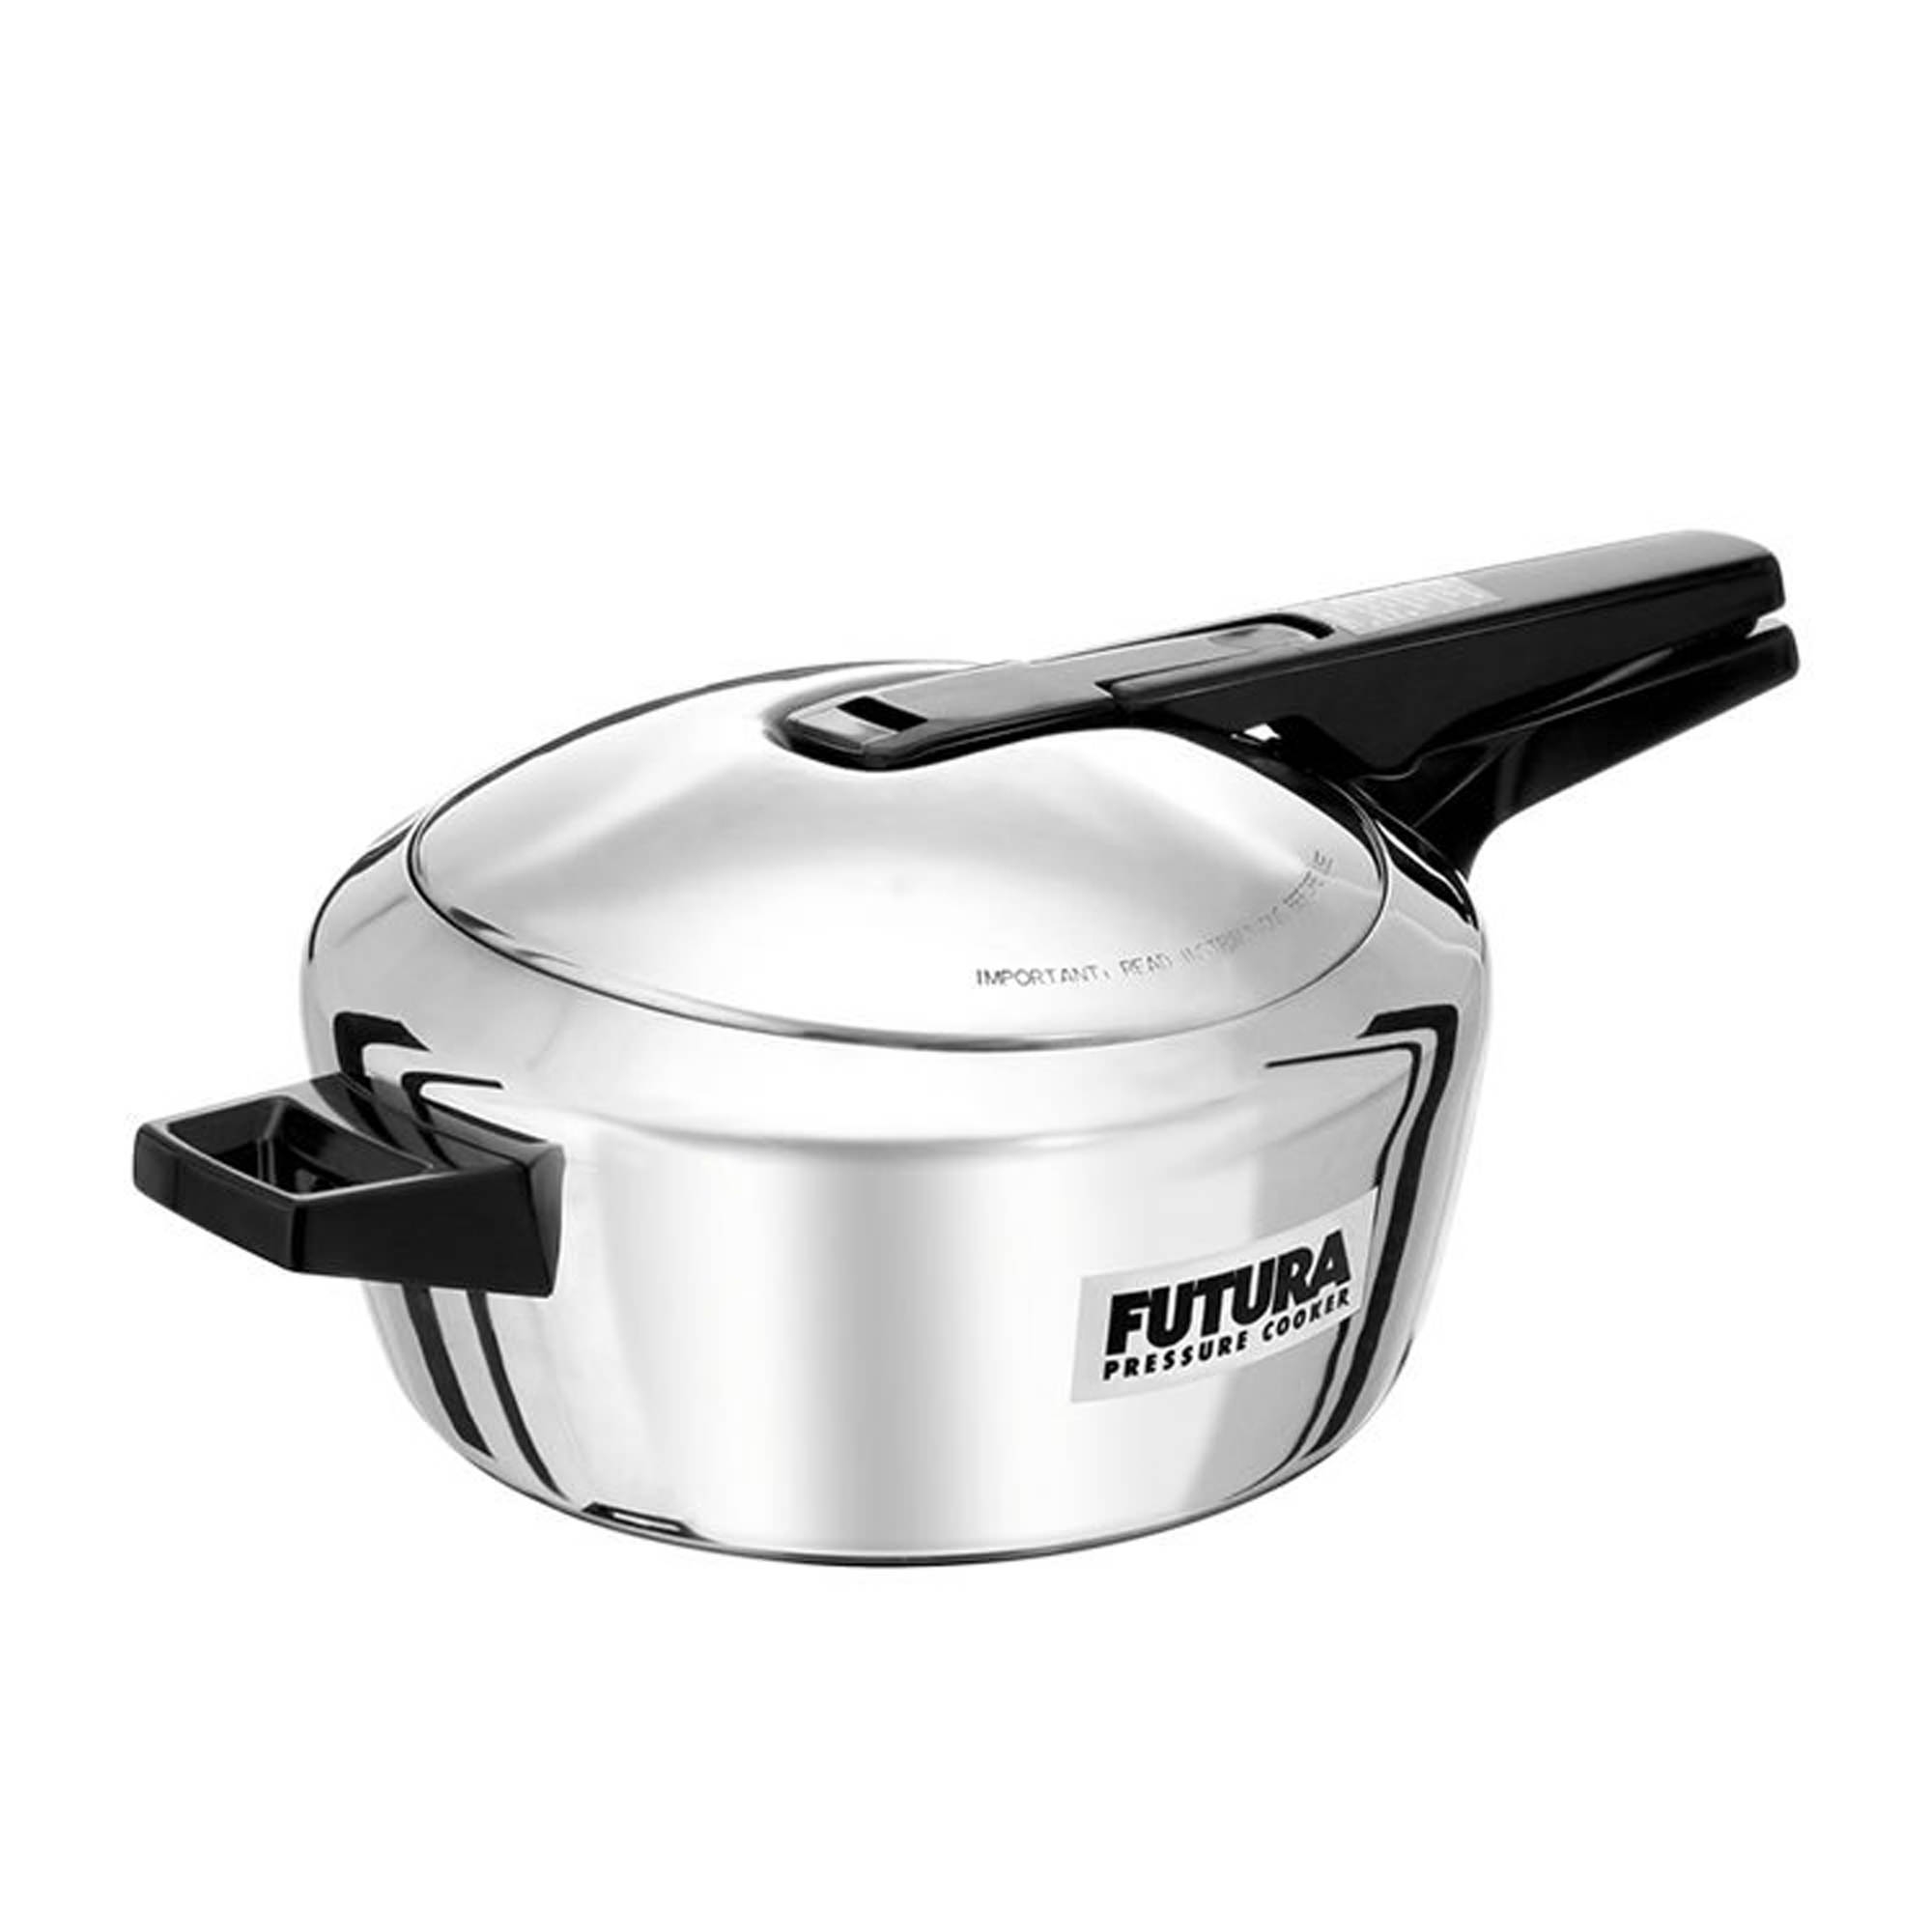 Futura Stainless Steel Pressure Cooker 4L Image 1